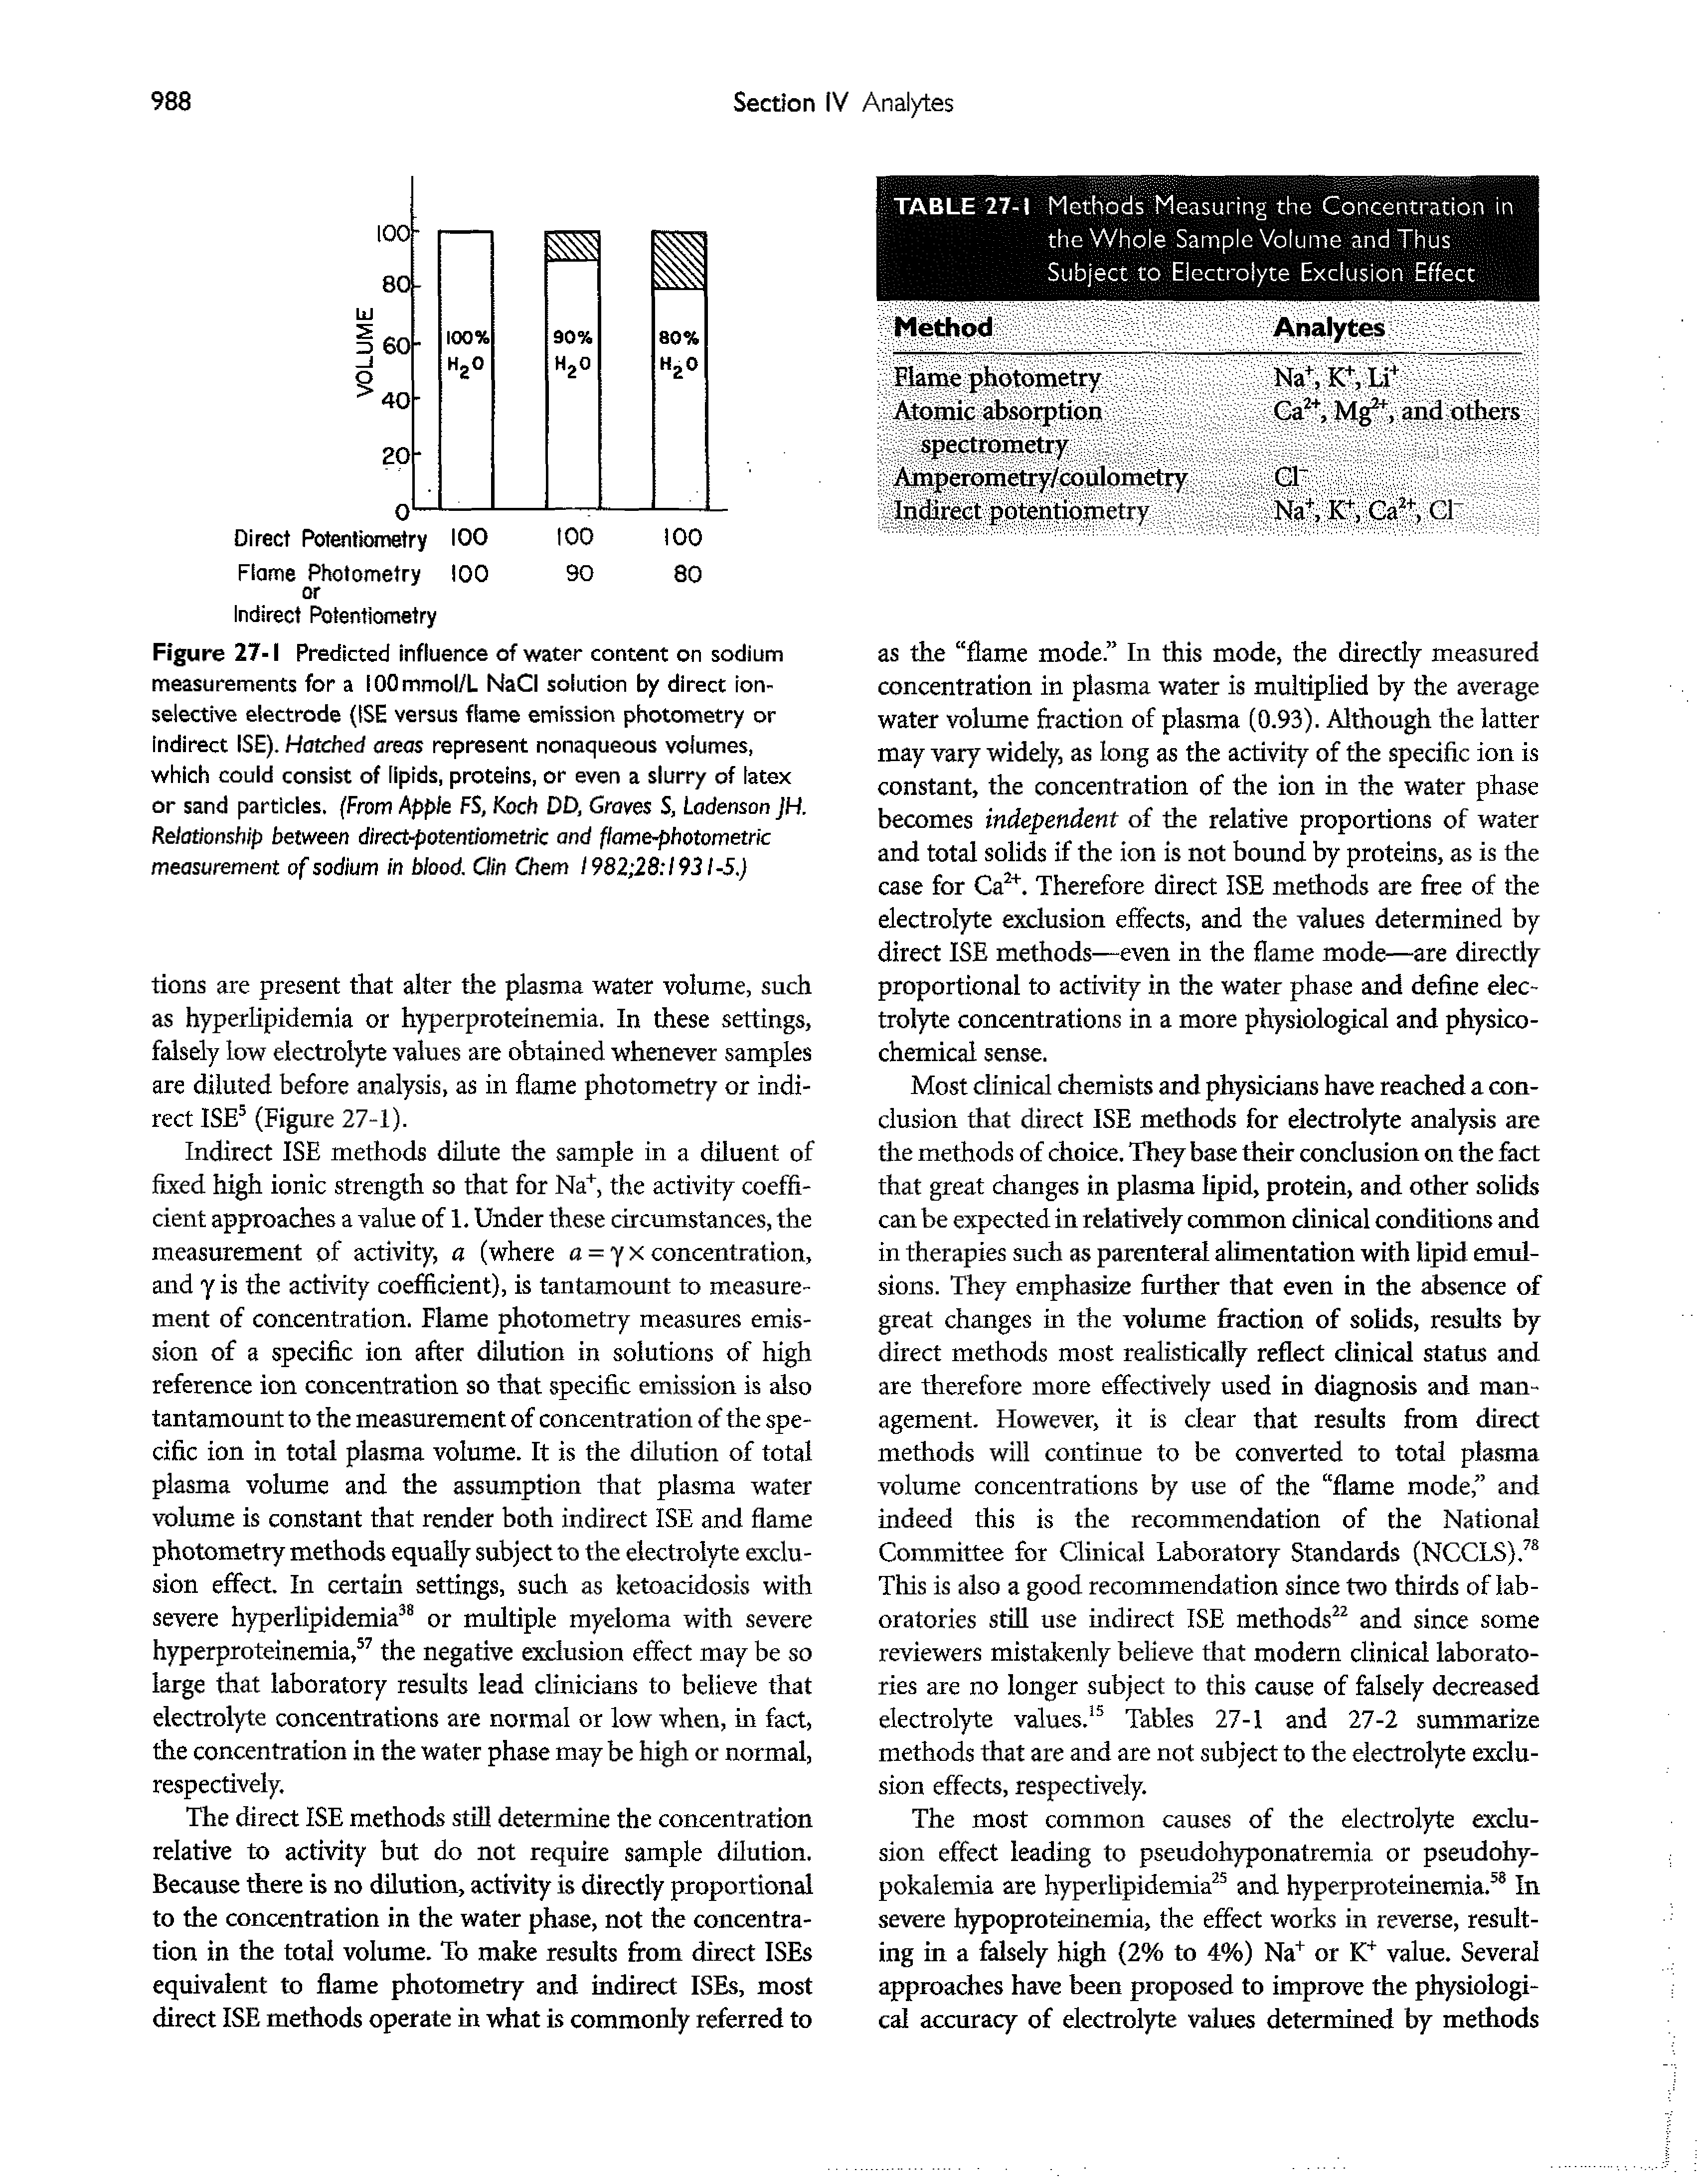 Figure 27-1 Predicted Influence of water content on sodium measurements for a lOOmmol/L NaCi solution by direct ion-selective electrode (tSE versus flame emission photometry or indirect ISE). Hatched areas represent nonaqueous volumes, which could consist of lipids, proteins, or even a slurry of latex or sand particles. (From Apple FS, Koch DD, Graves S, Ladenson JH. Relationship between d/rect-potent/ometric and flame-photometric measurement of sodium in blood. Clin Chem 1982 28 1931-5.)...